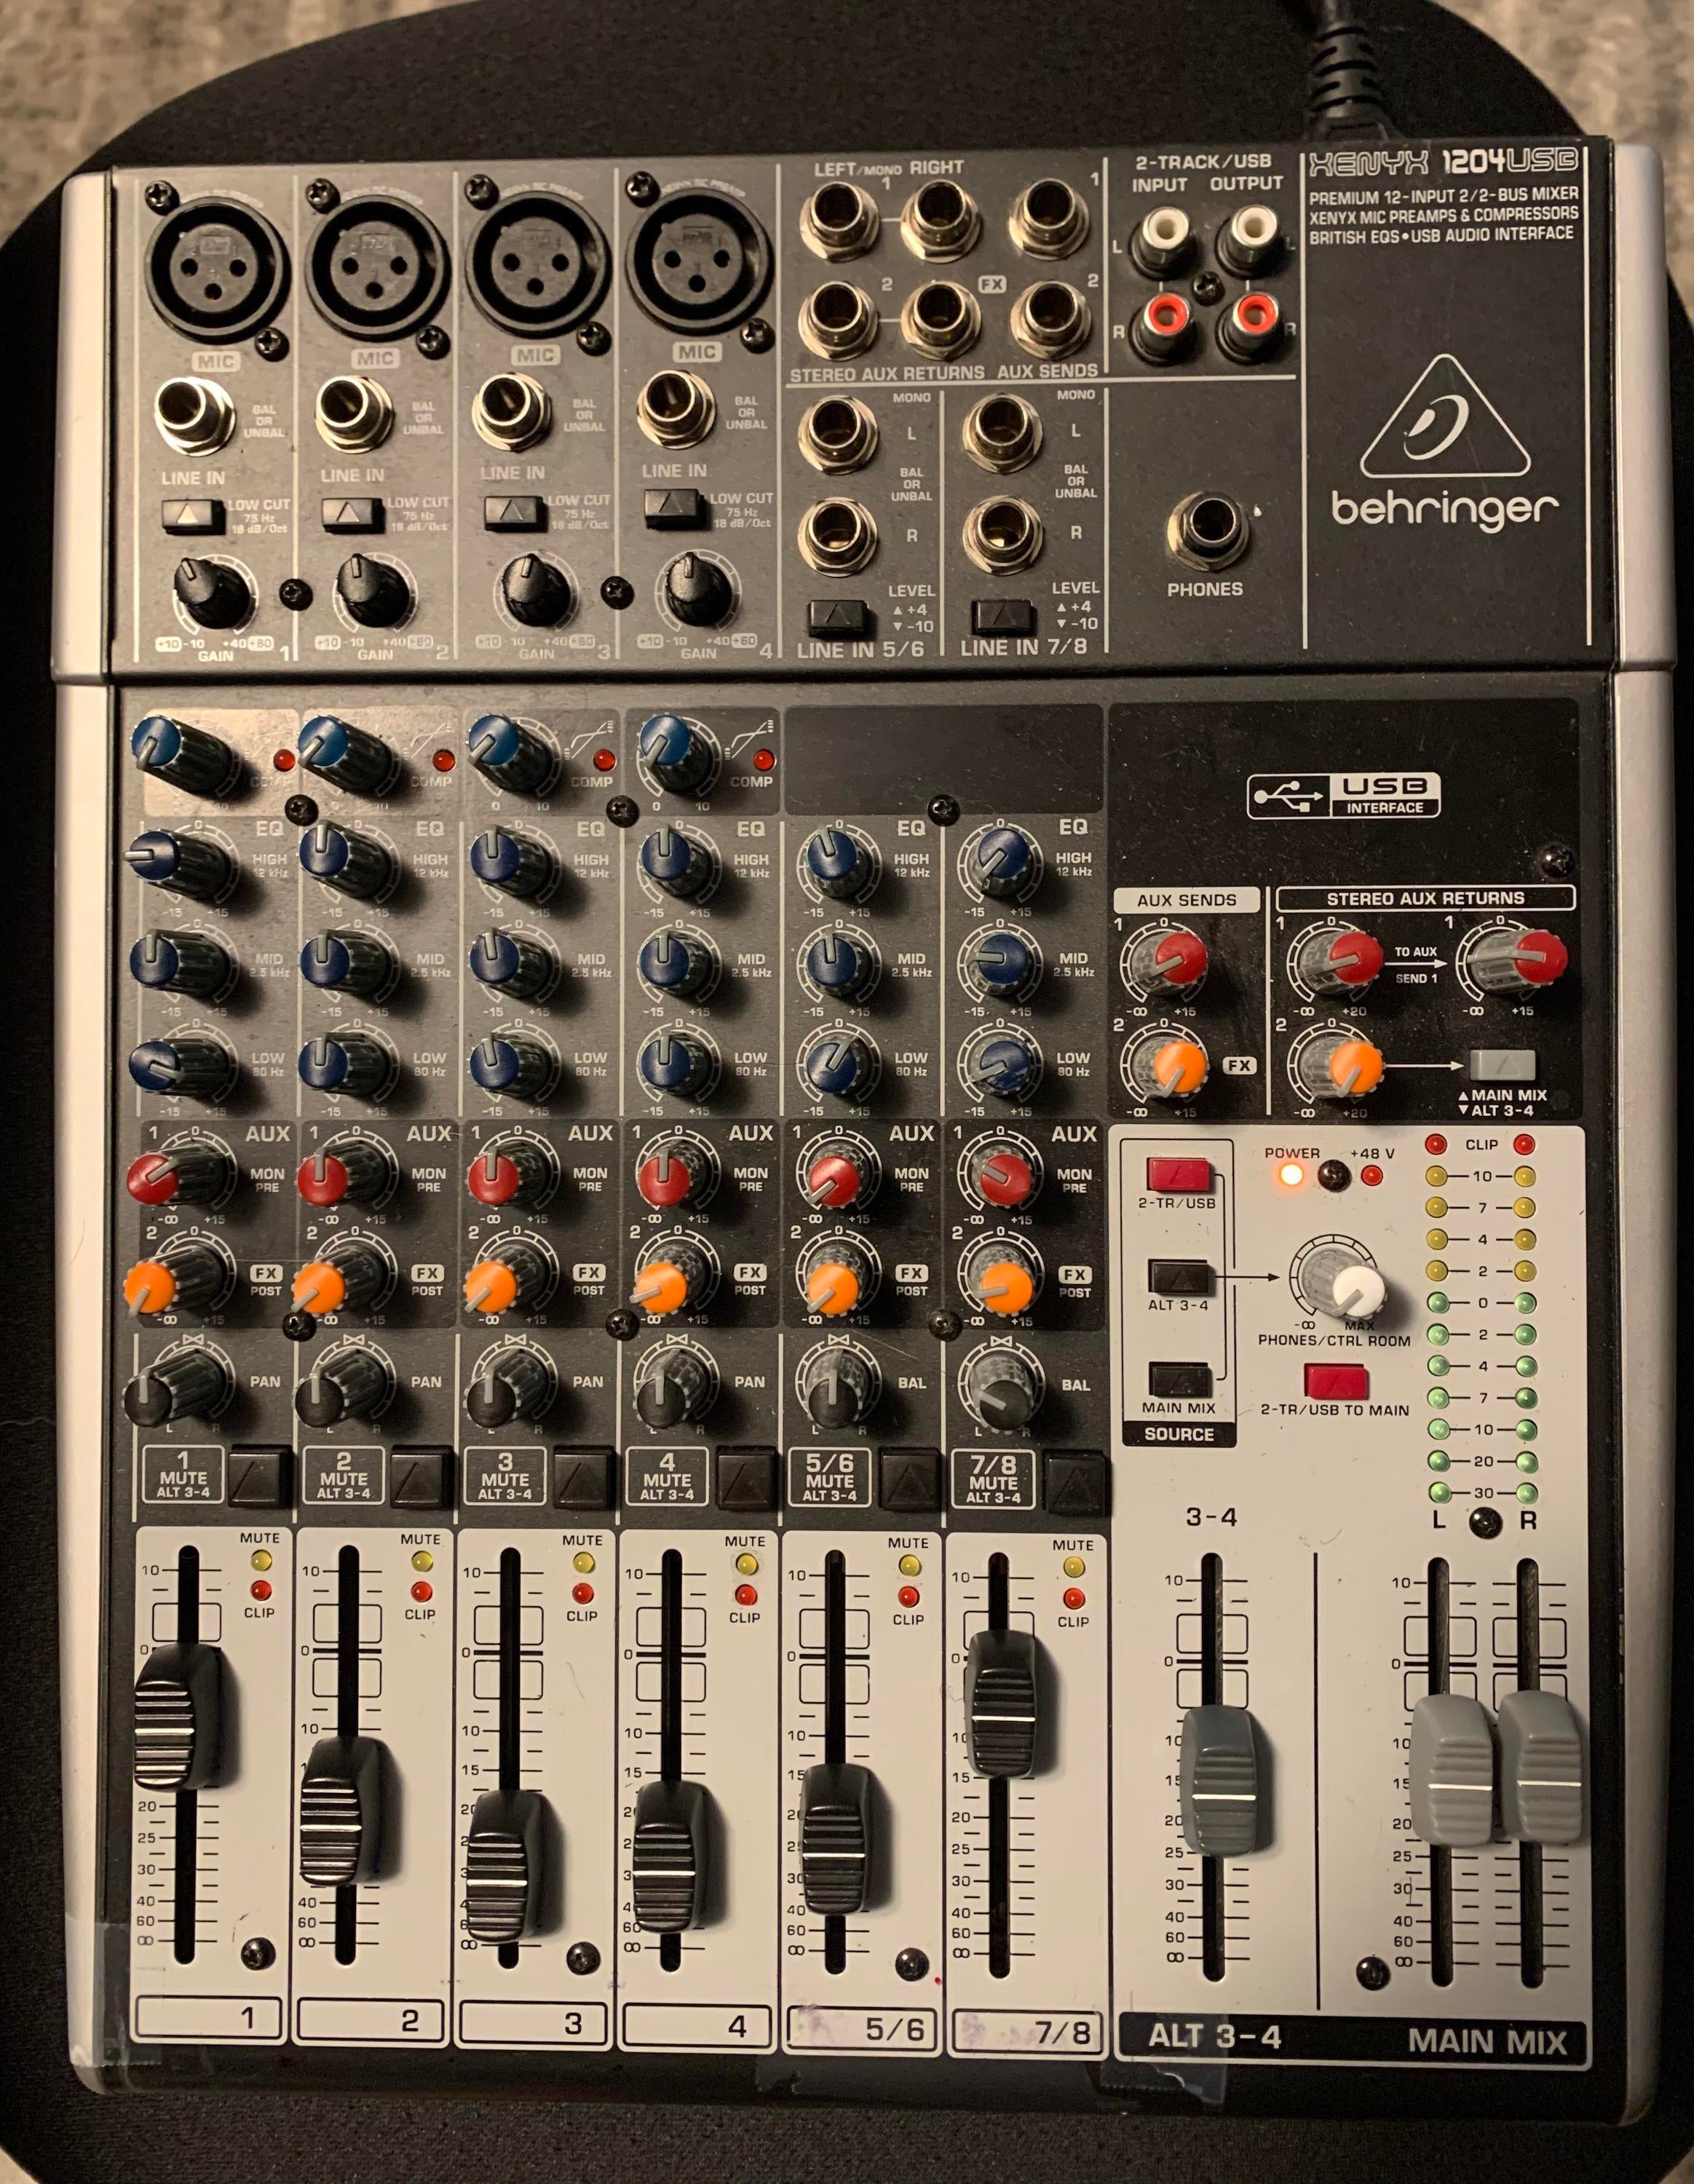 Used Behringer Xenyx 1204USB Mixer with USB - Sweetwater's Gear